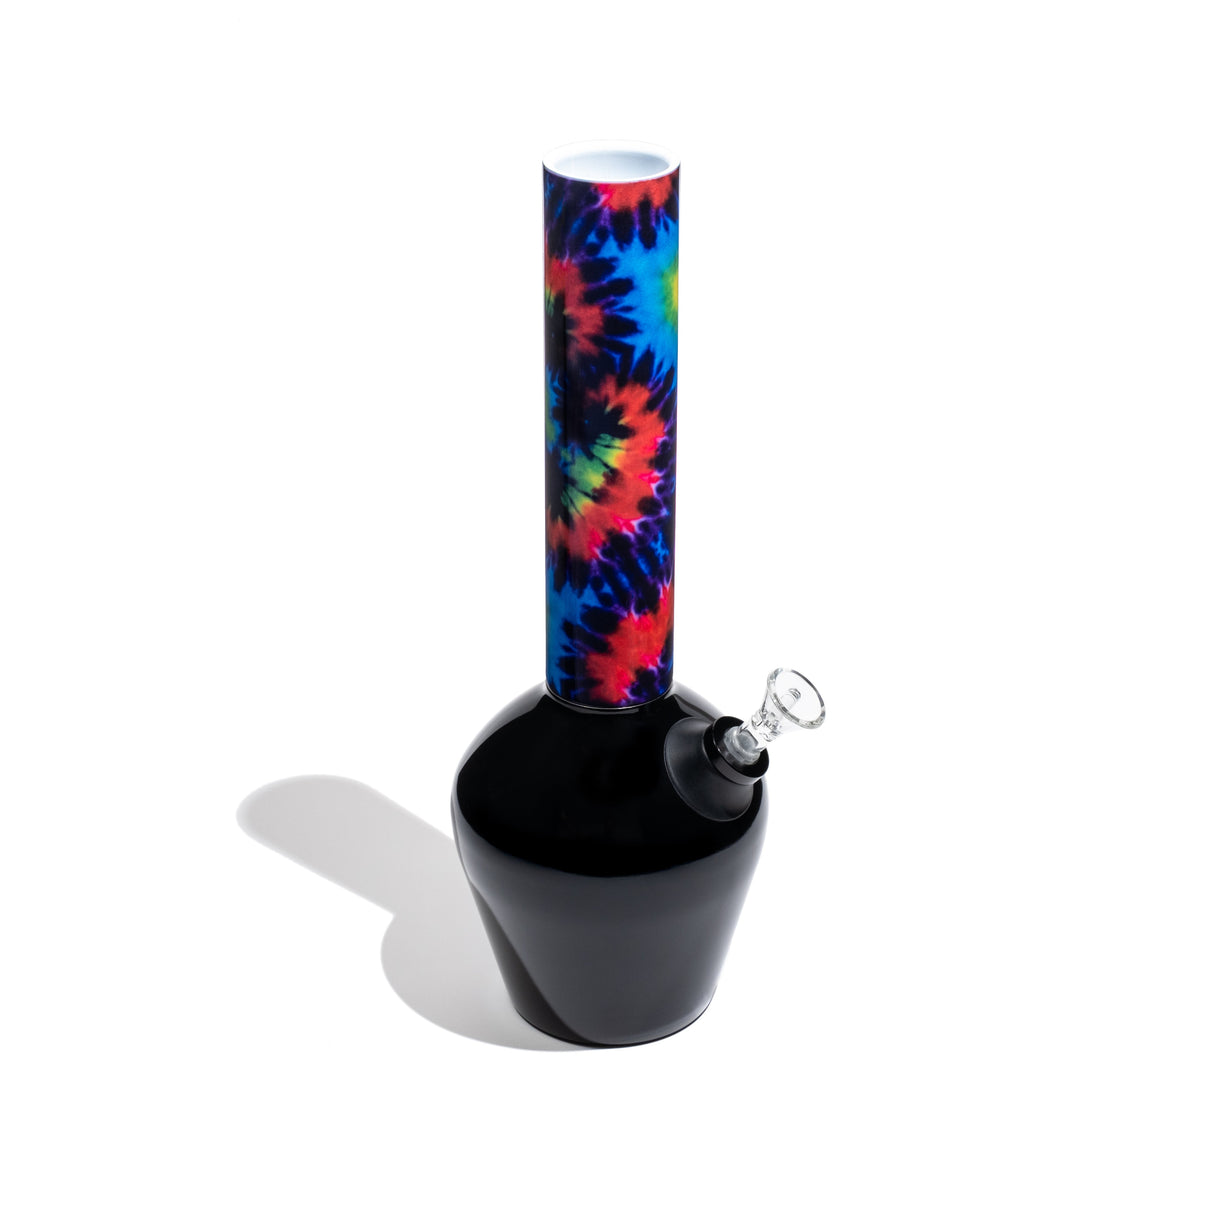 Chill Steel Pipes Classic Tie Dye Neckpiece for Bongs - Top Angle on White Background